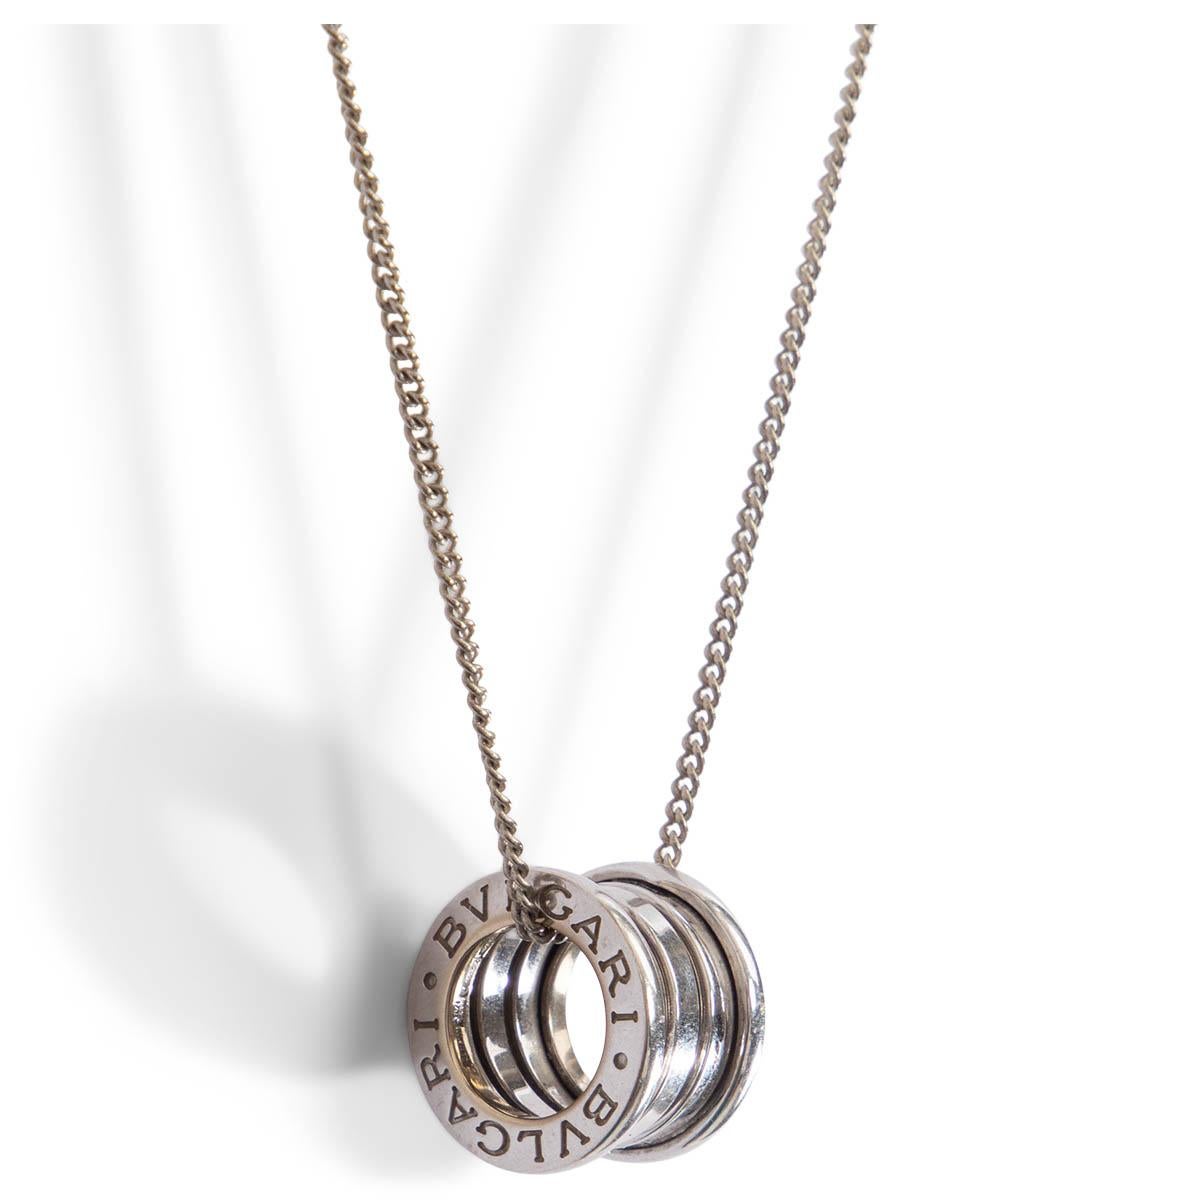 100% authentic Bulgari B. Zero 1 pendant necklace in 18k white gold drawing its inspiration from the world’s most renowned amphitheater, the Colosseum, B.zero1 is a groundbreaking statement of Bvlgari’s daring creative vision. As the ultimate unisex